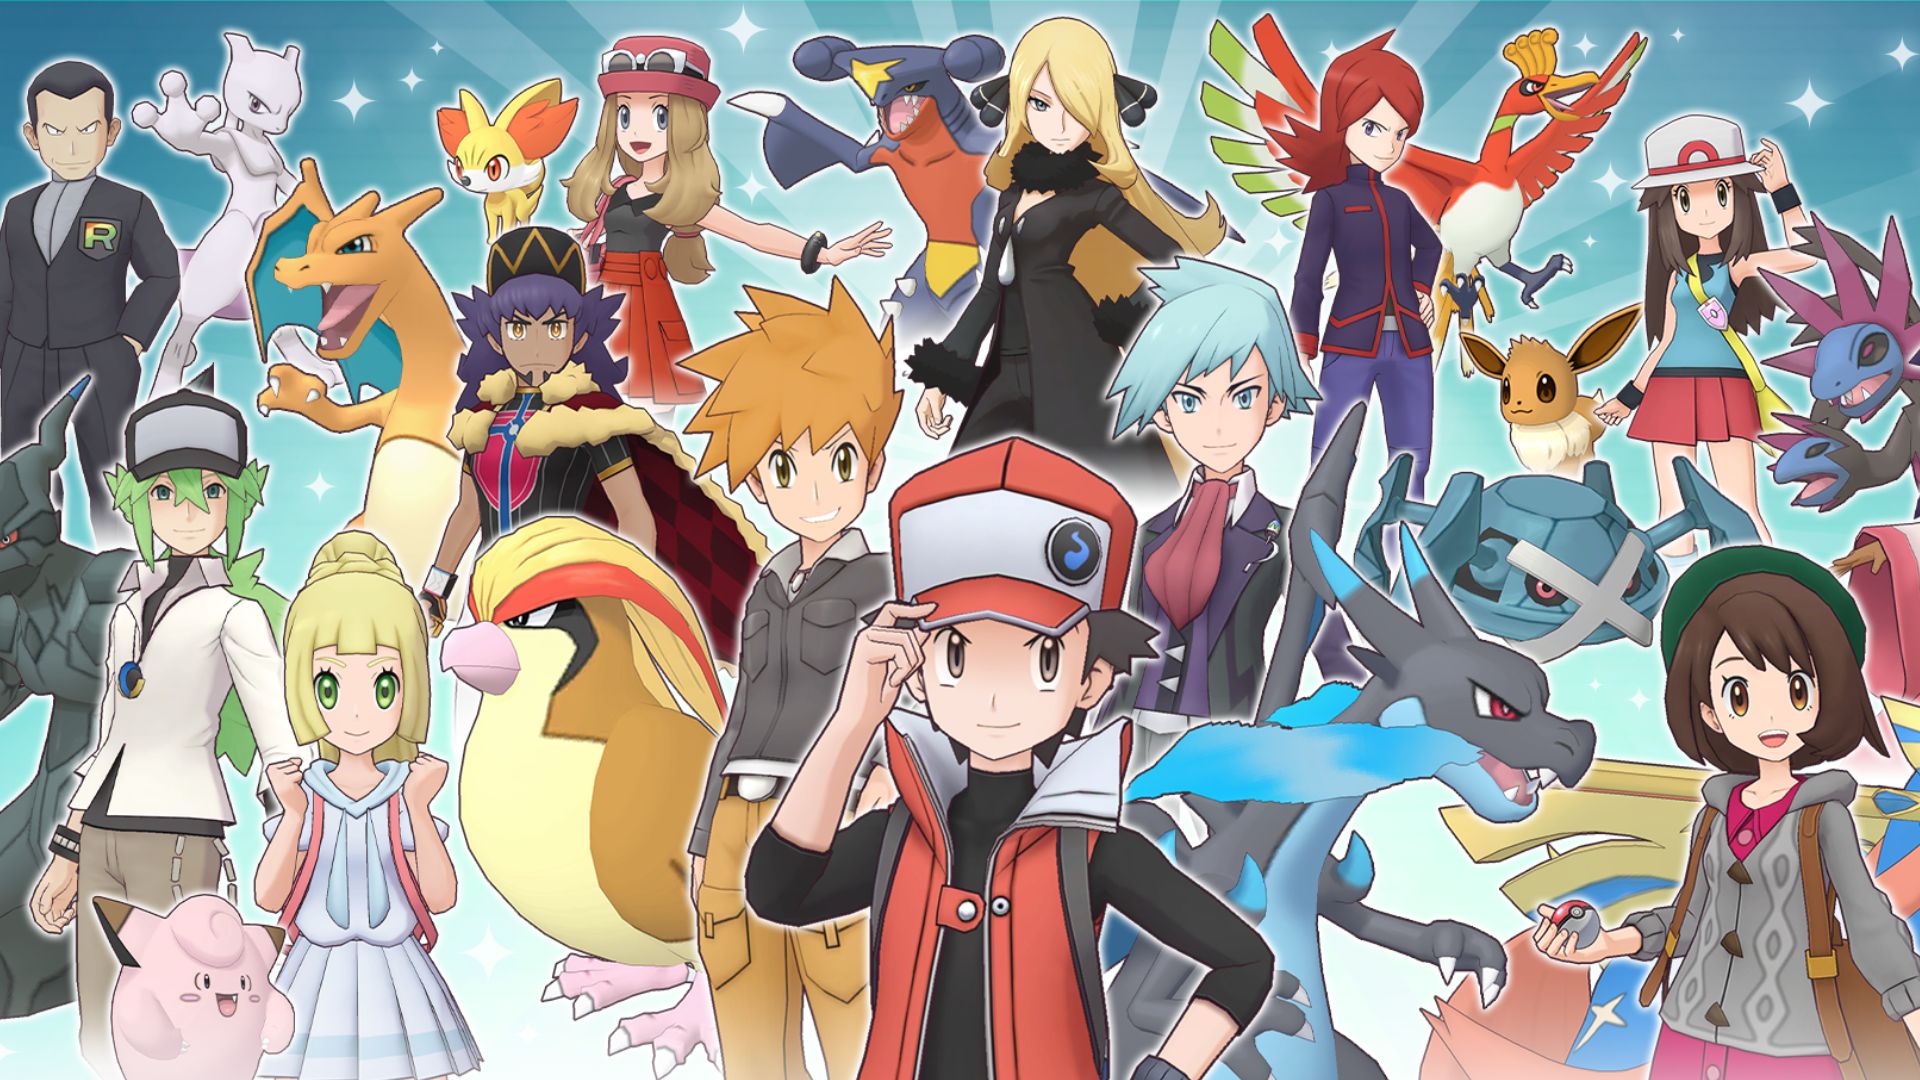 Play Anime pokemon for free without downloads